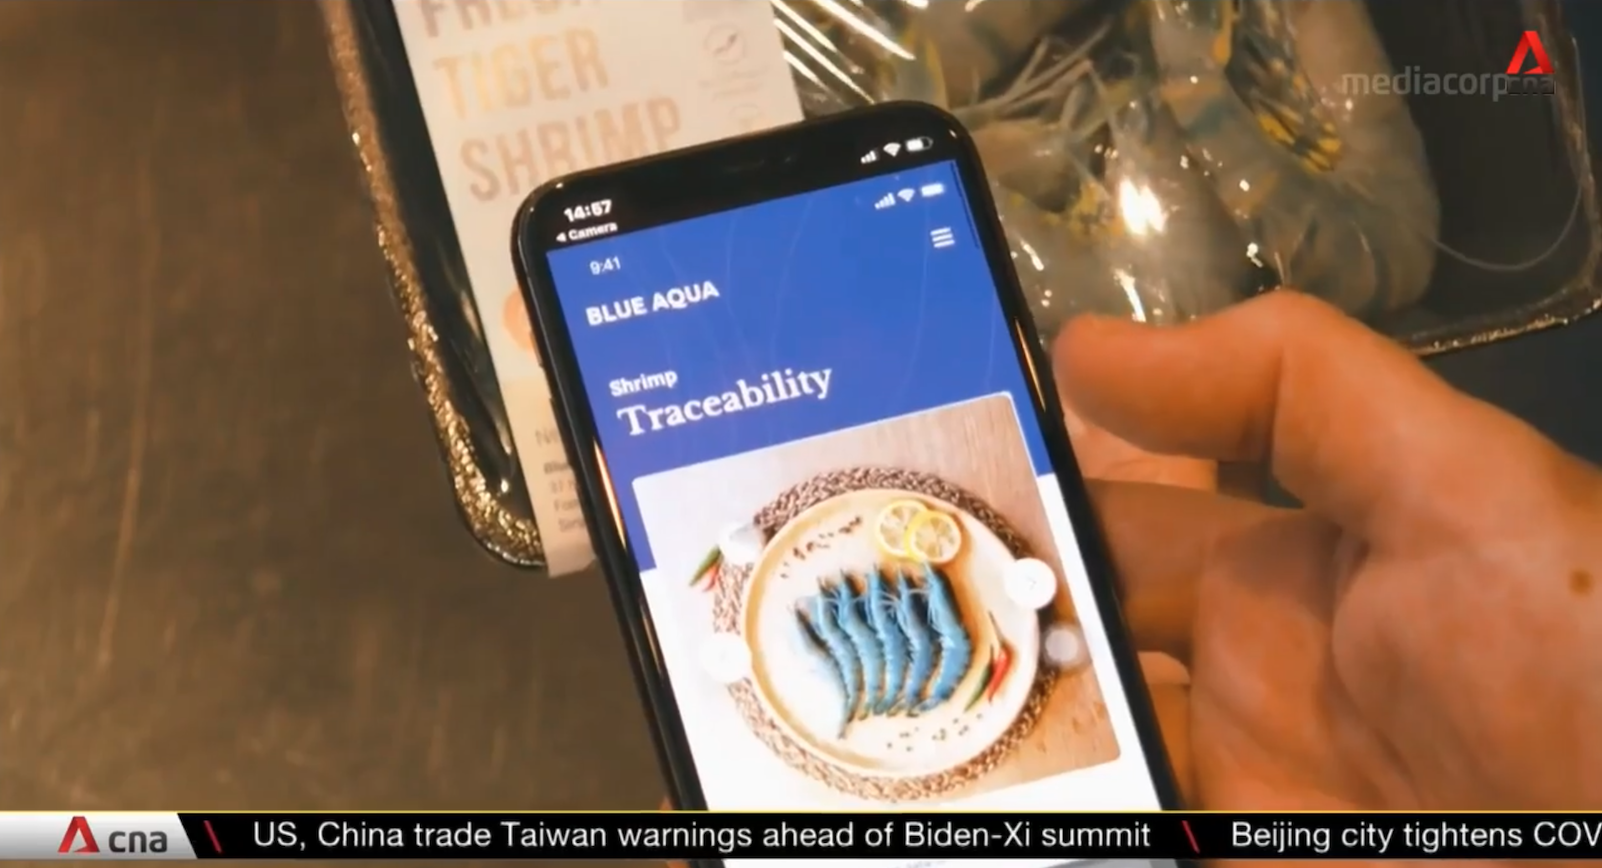 CNA: Businesses in Singapore turn to technology to ensure food sustainability